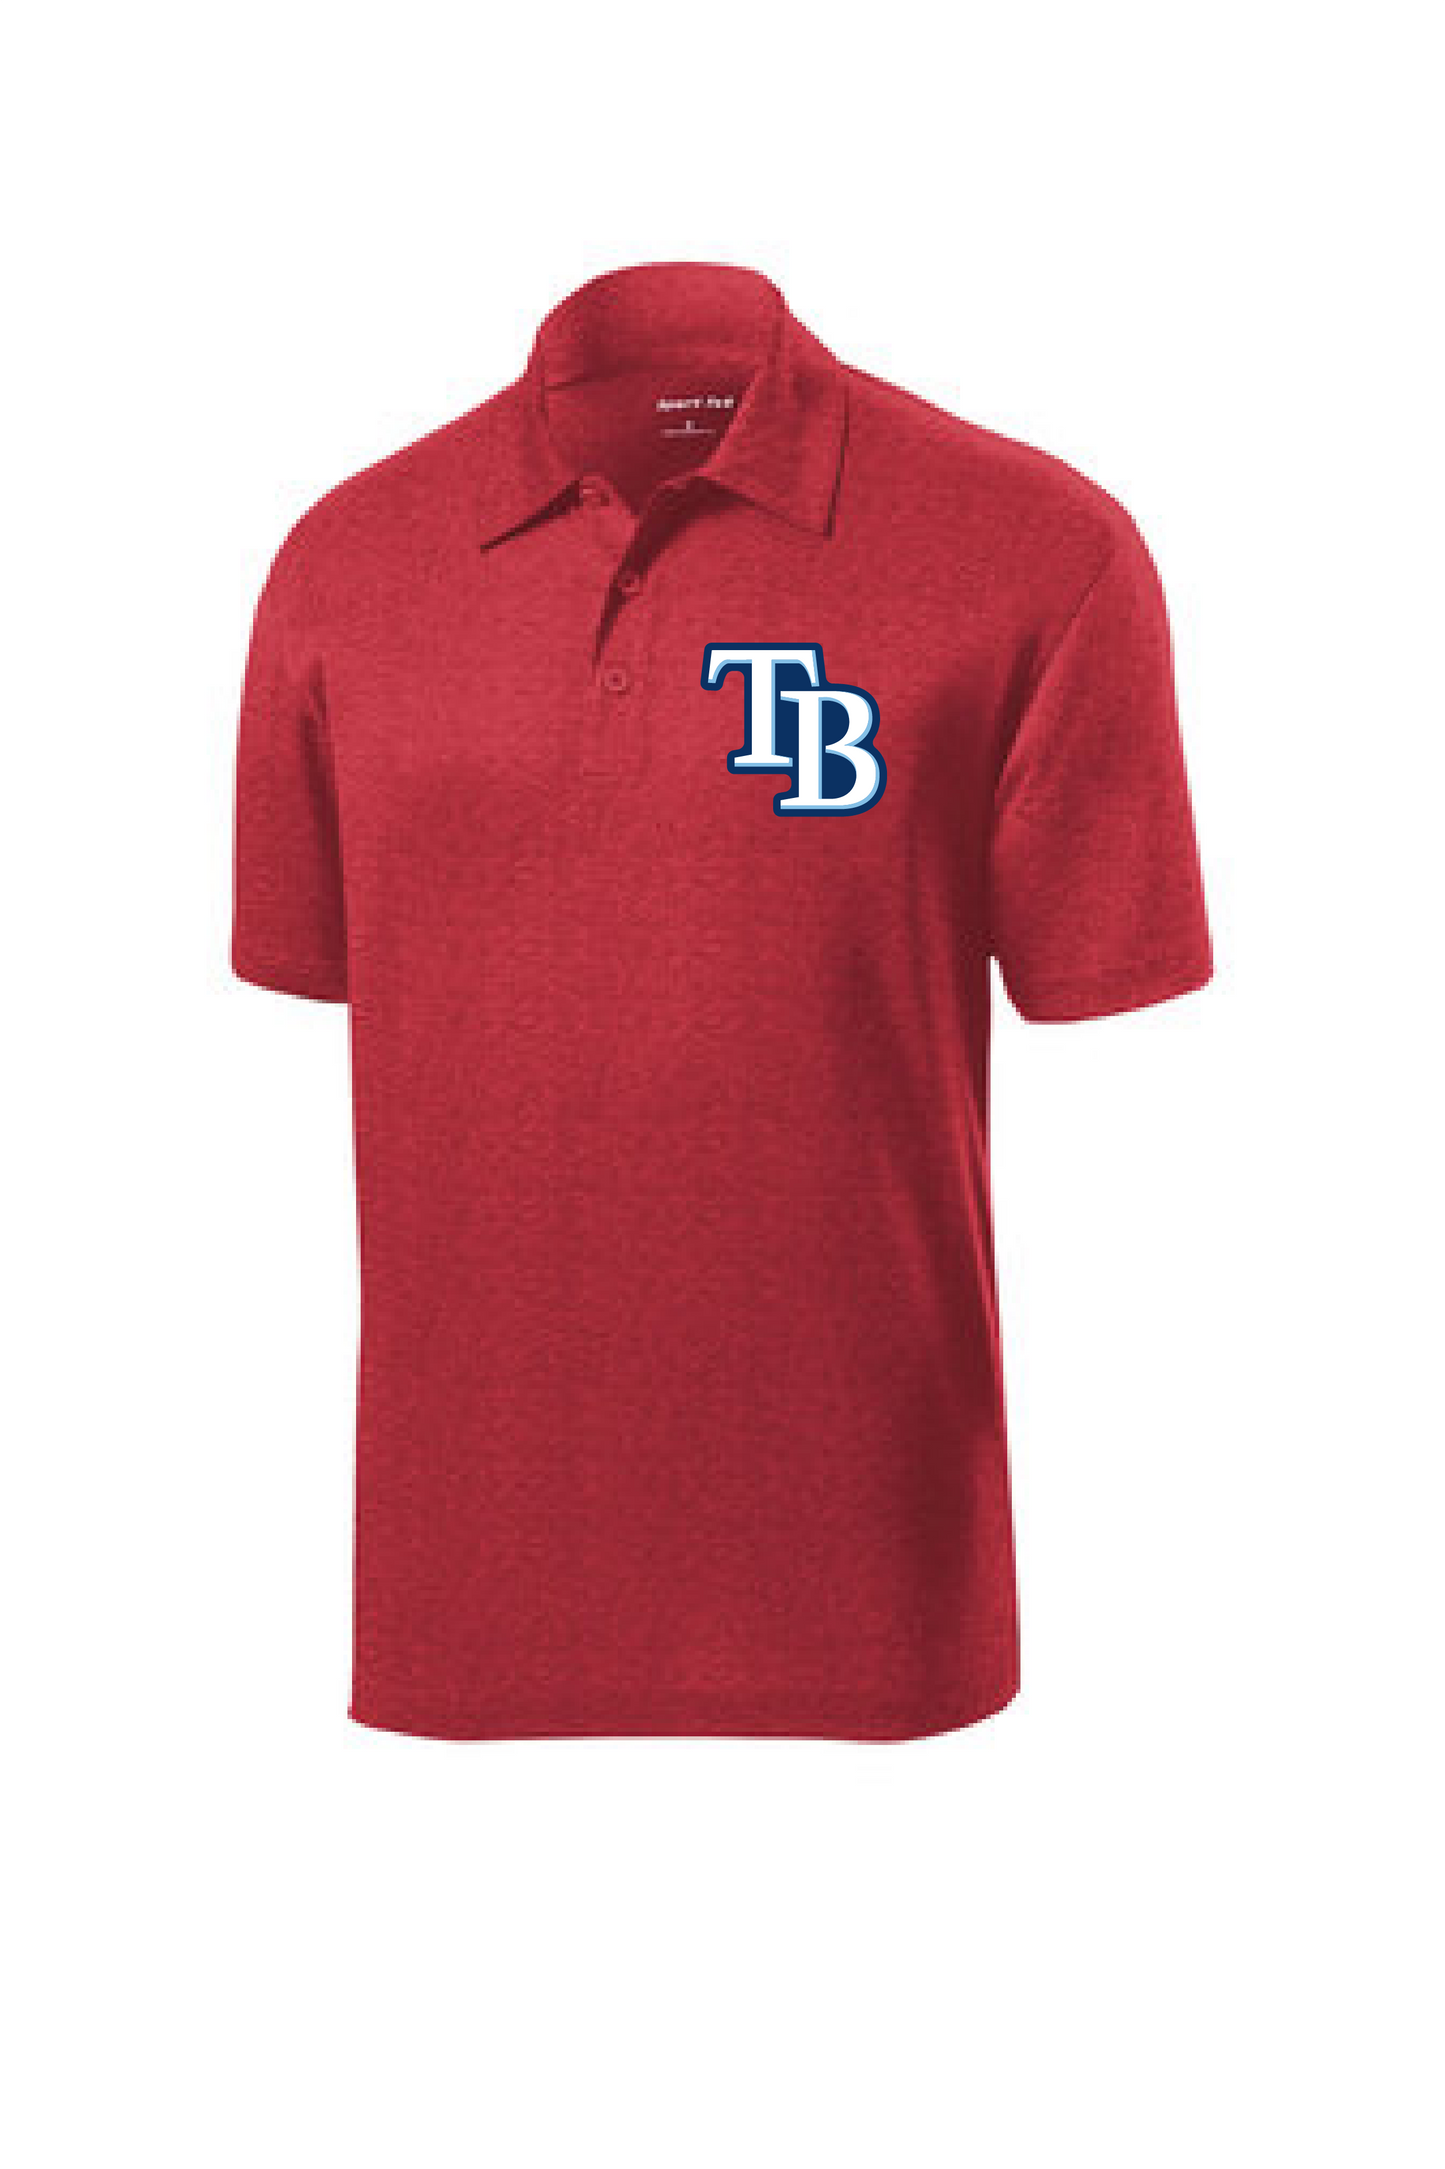 Tsunami Red Dry Fit Sport Tek Embroidered Polo